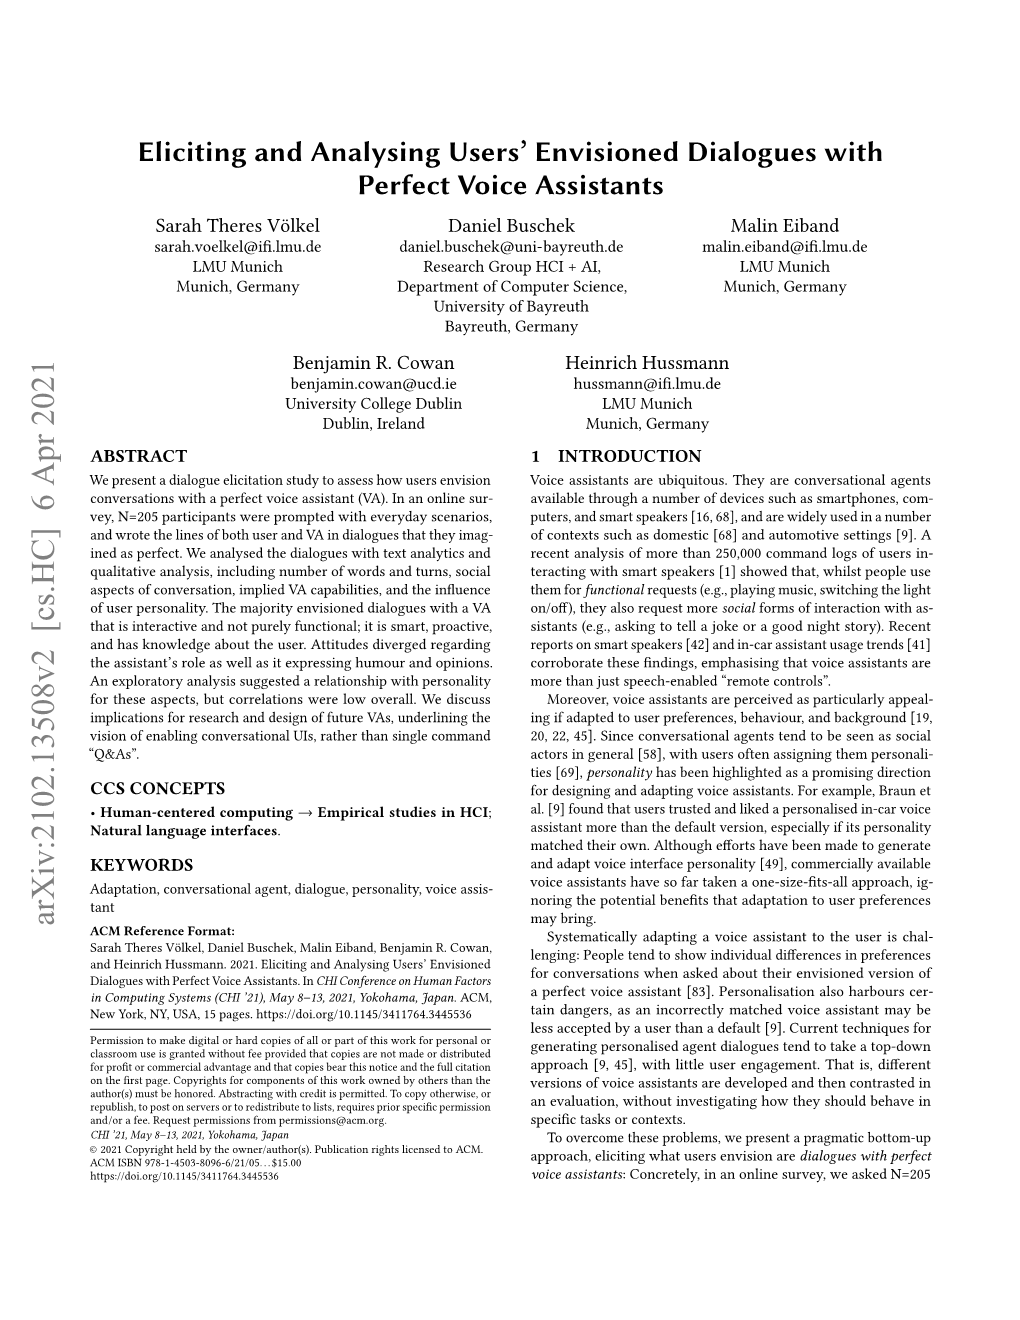 Eliciting and Analysing Users' Envisioned Dialogues with Perfect Voice Assistants